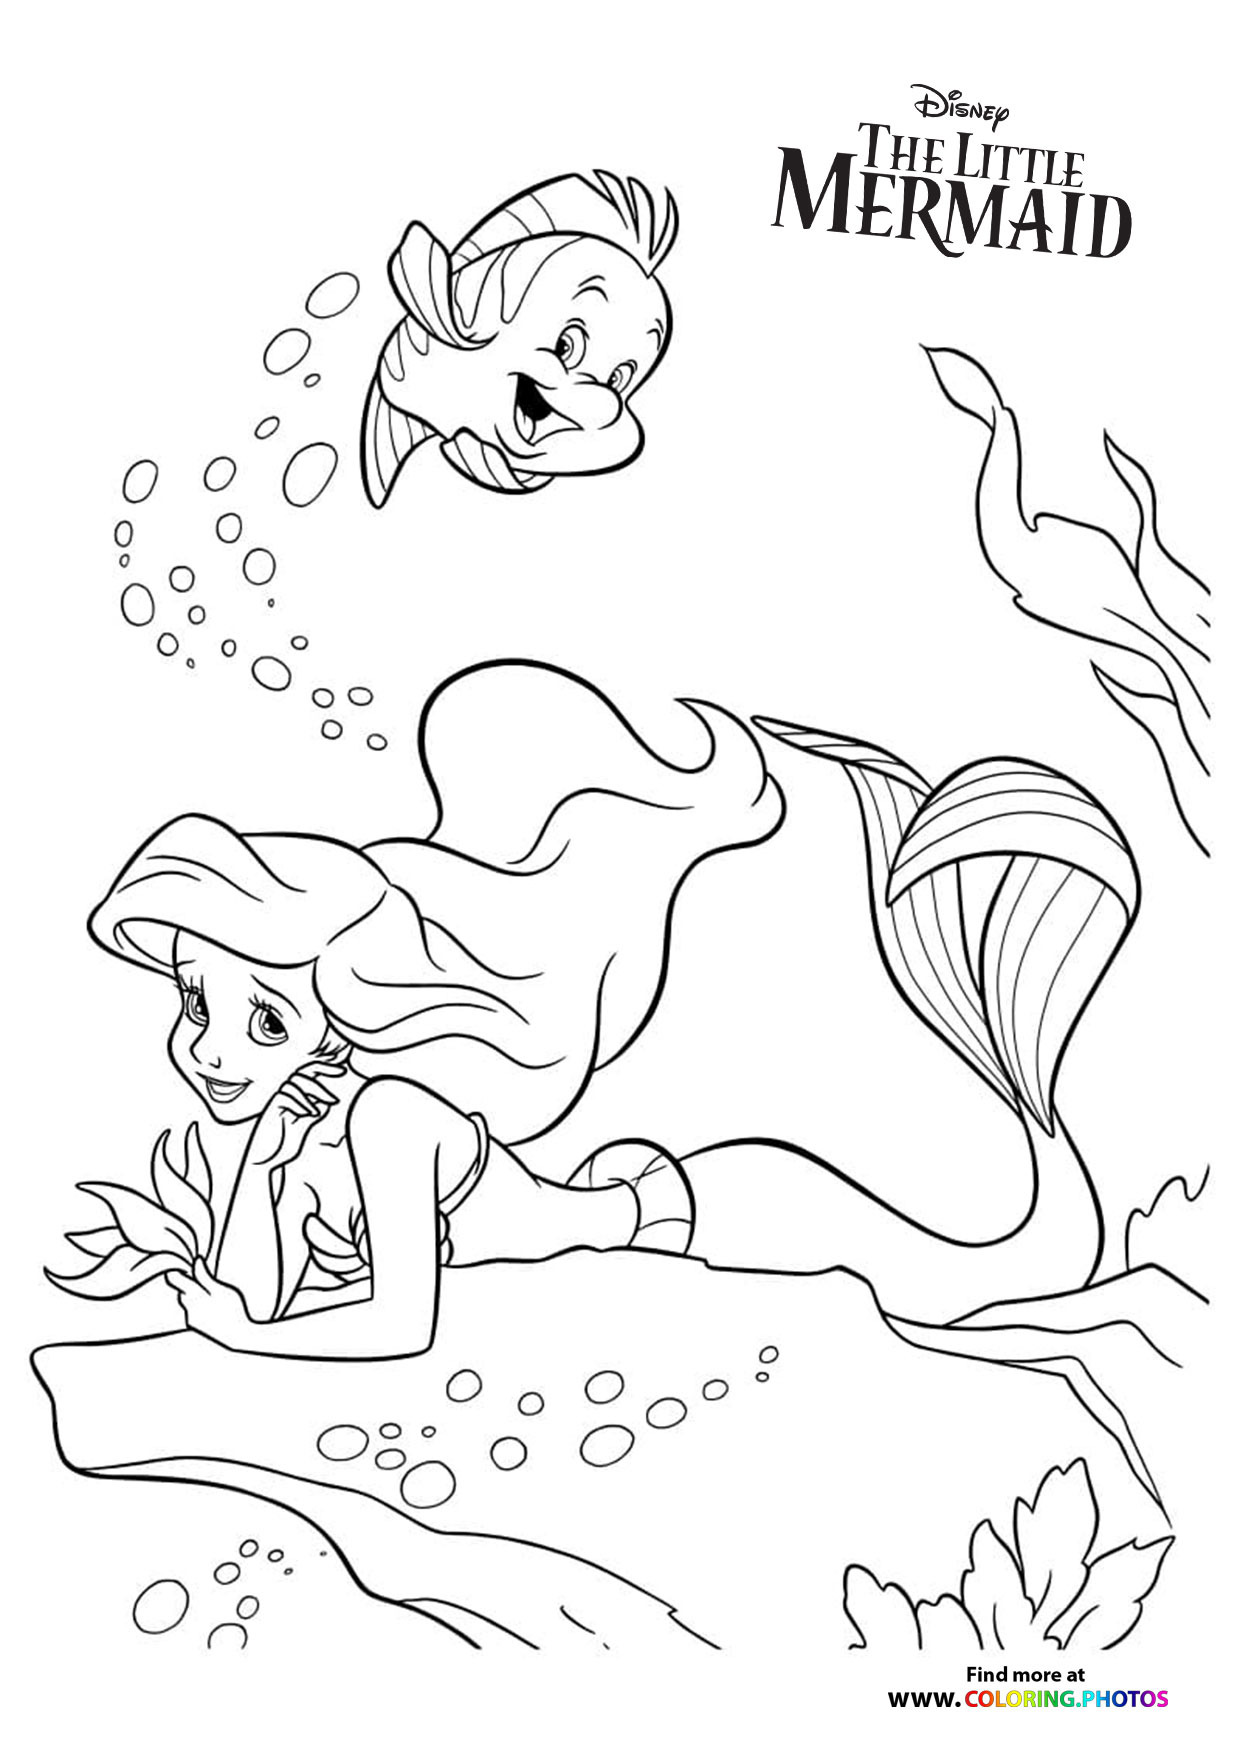 Ariel and Flounder swimming - Coloring Pages for kids